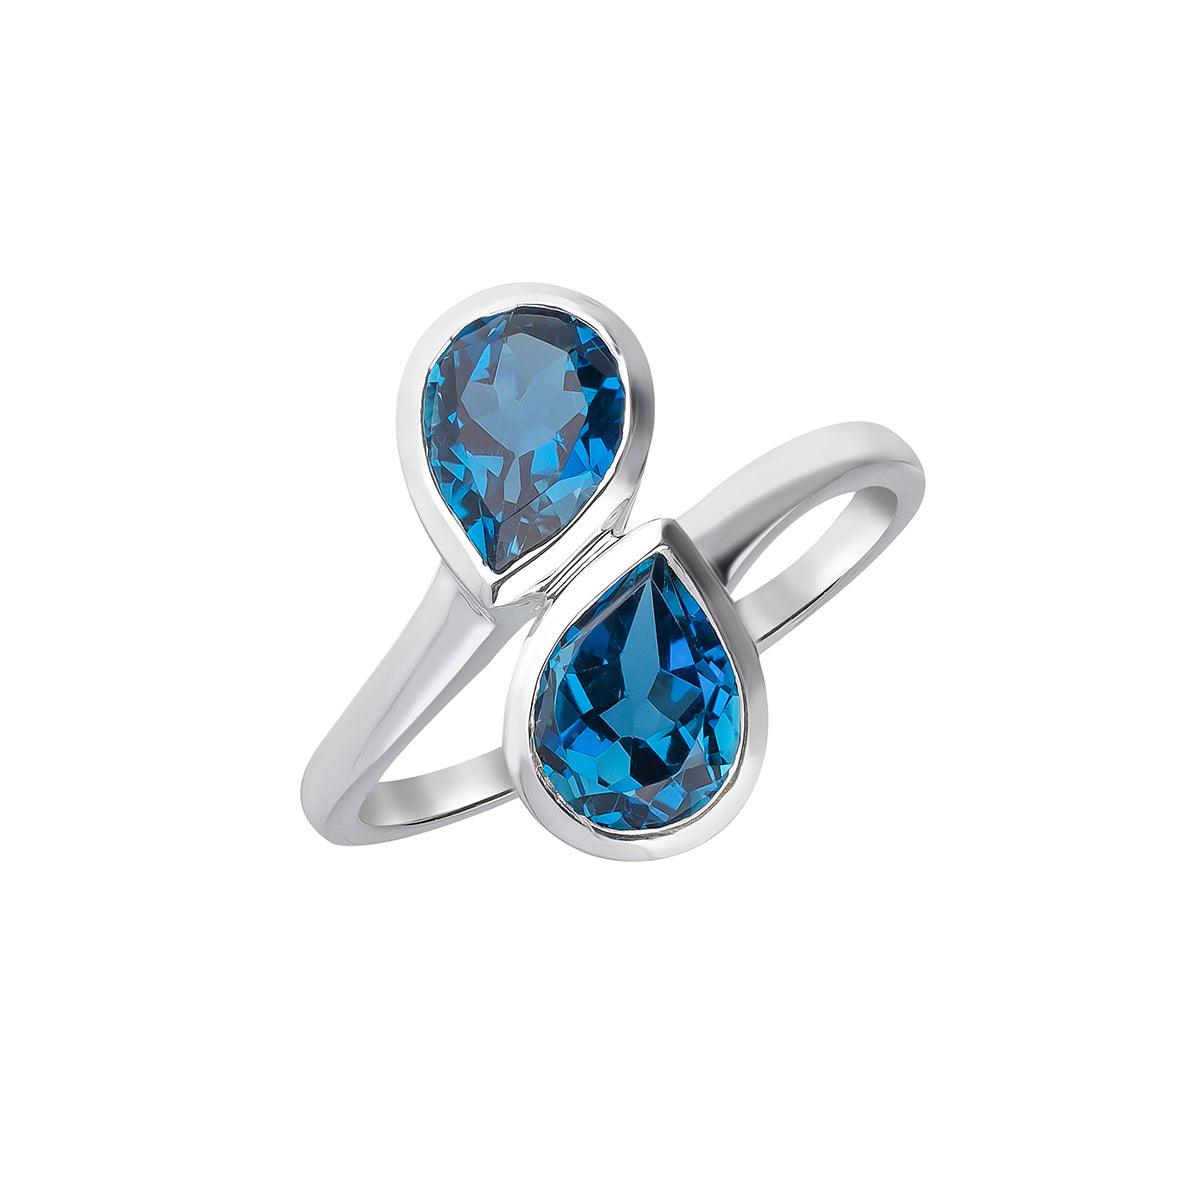 2.47 Ct. London Blue Topaz Ring Solid 925 Sterling Silver Jewelry - YoTreasure